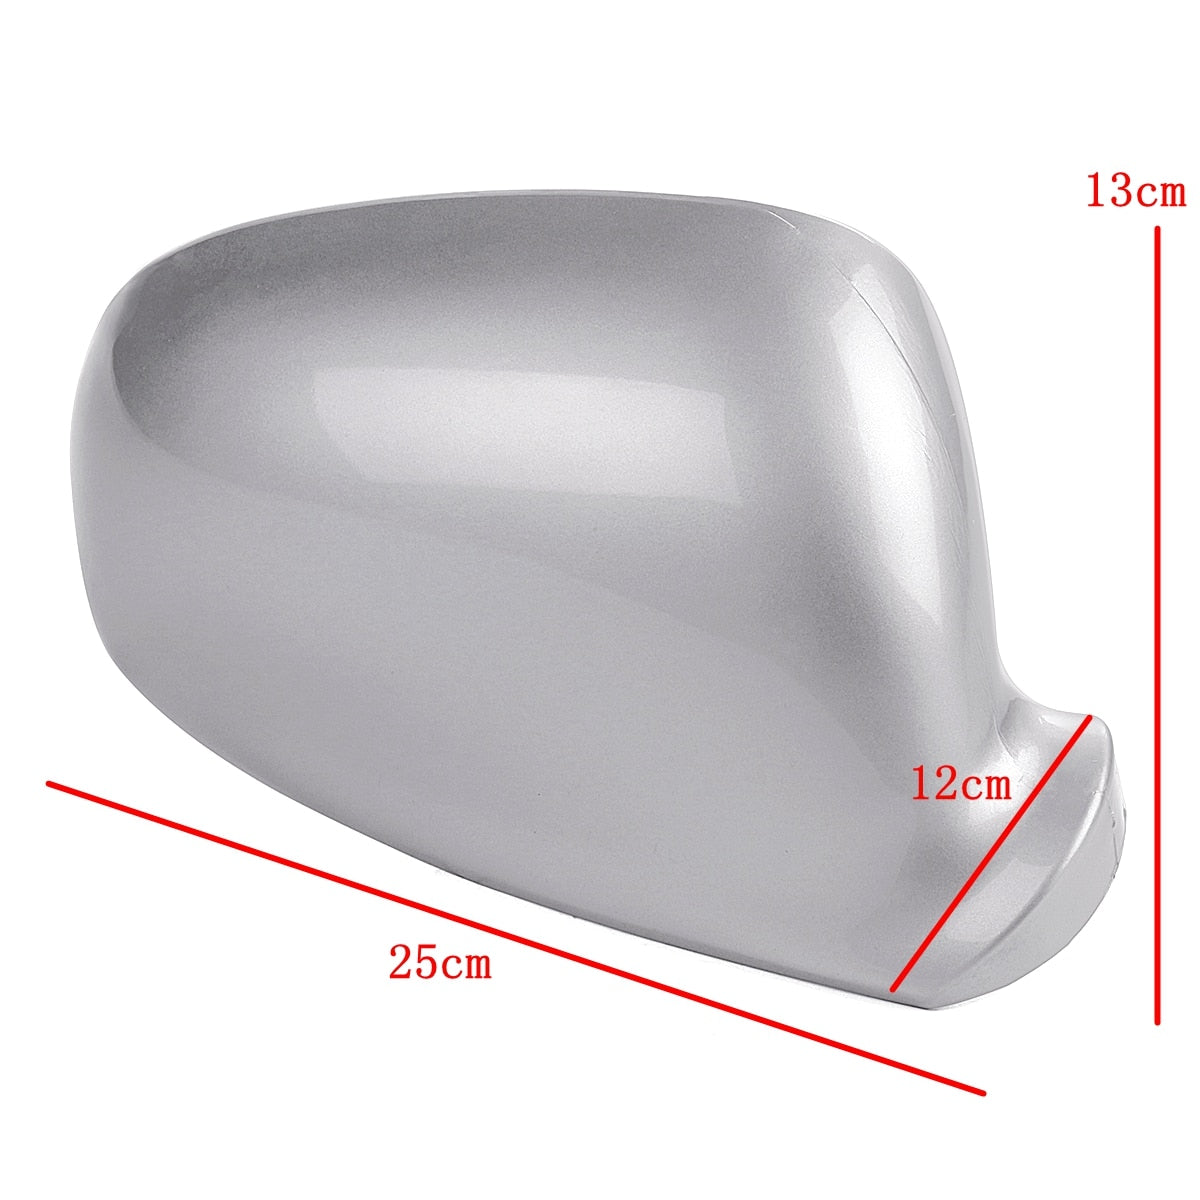 (LEFT) Rearview Side Wing Mirror Cover Silver Suit For VW Golf Jetta MK5 2003 - 2009